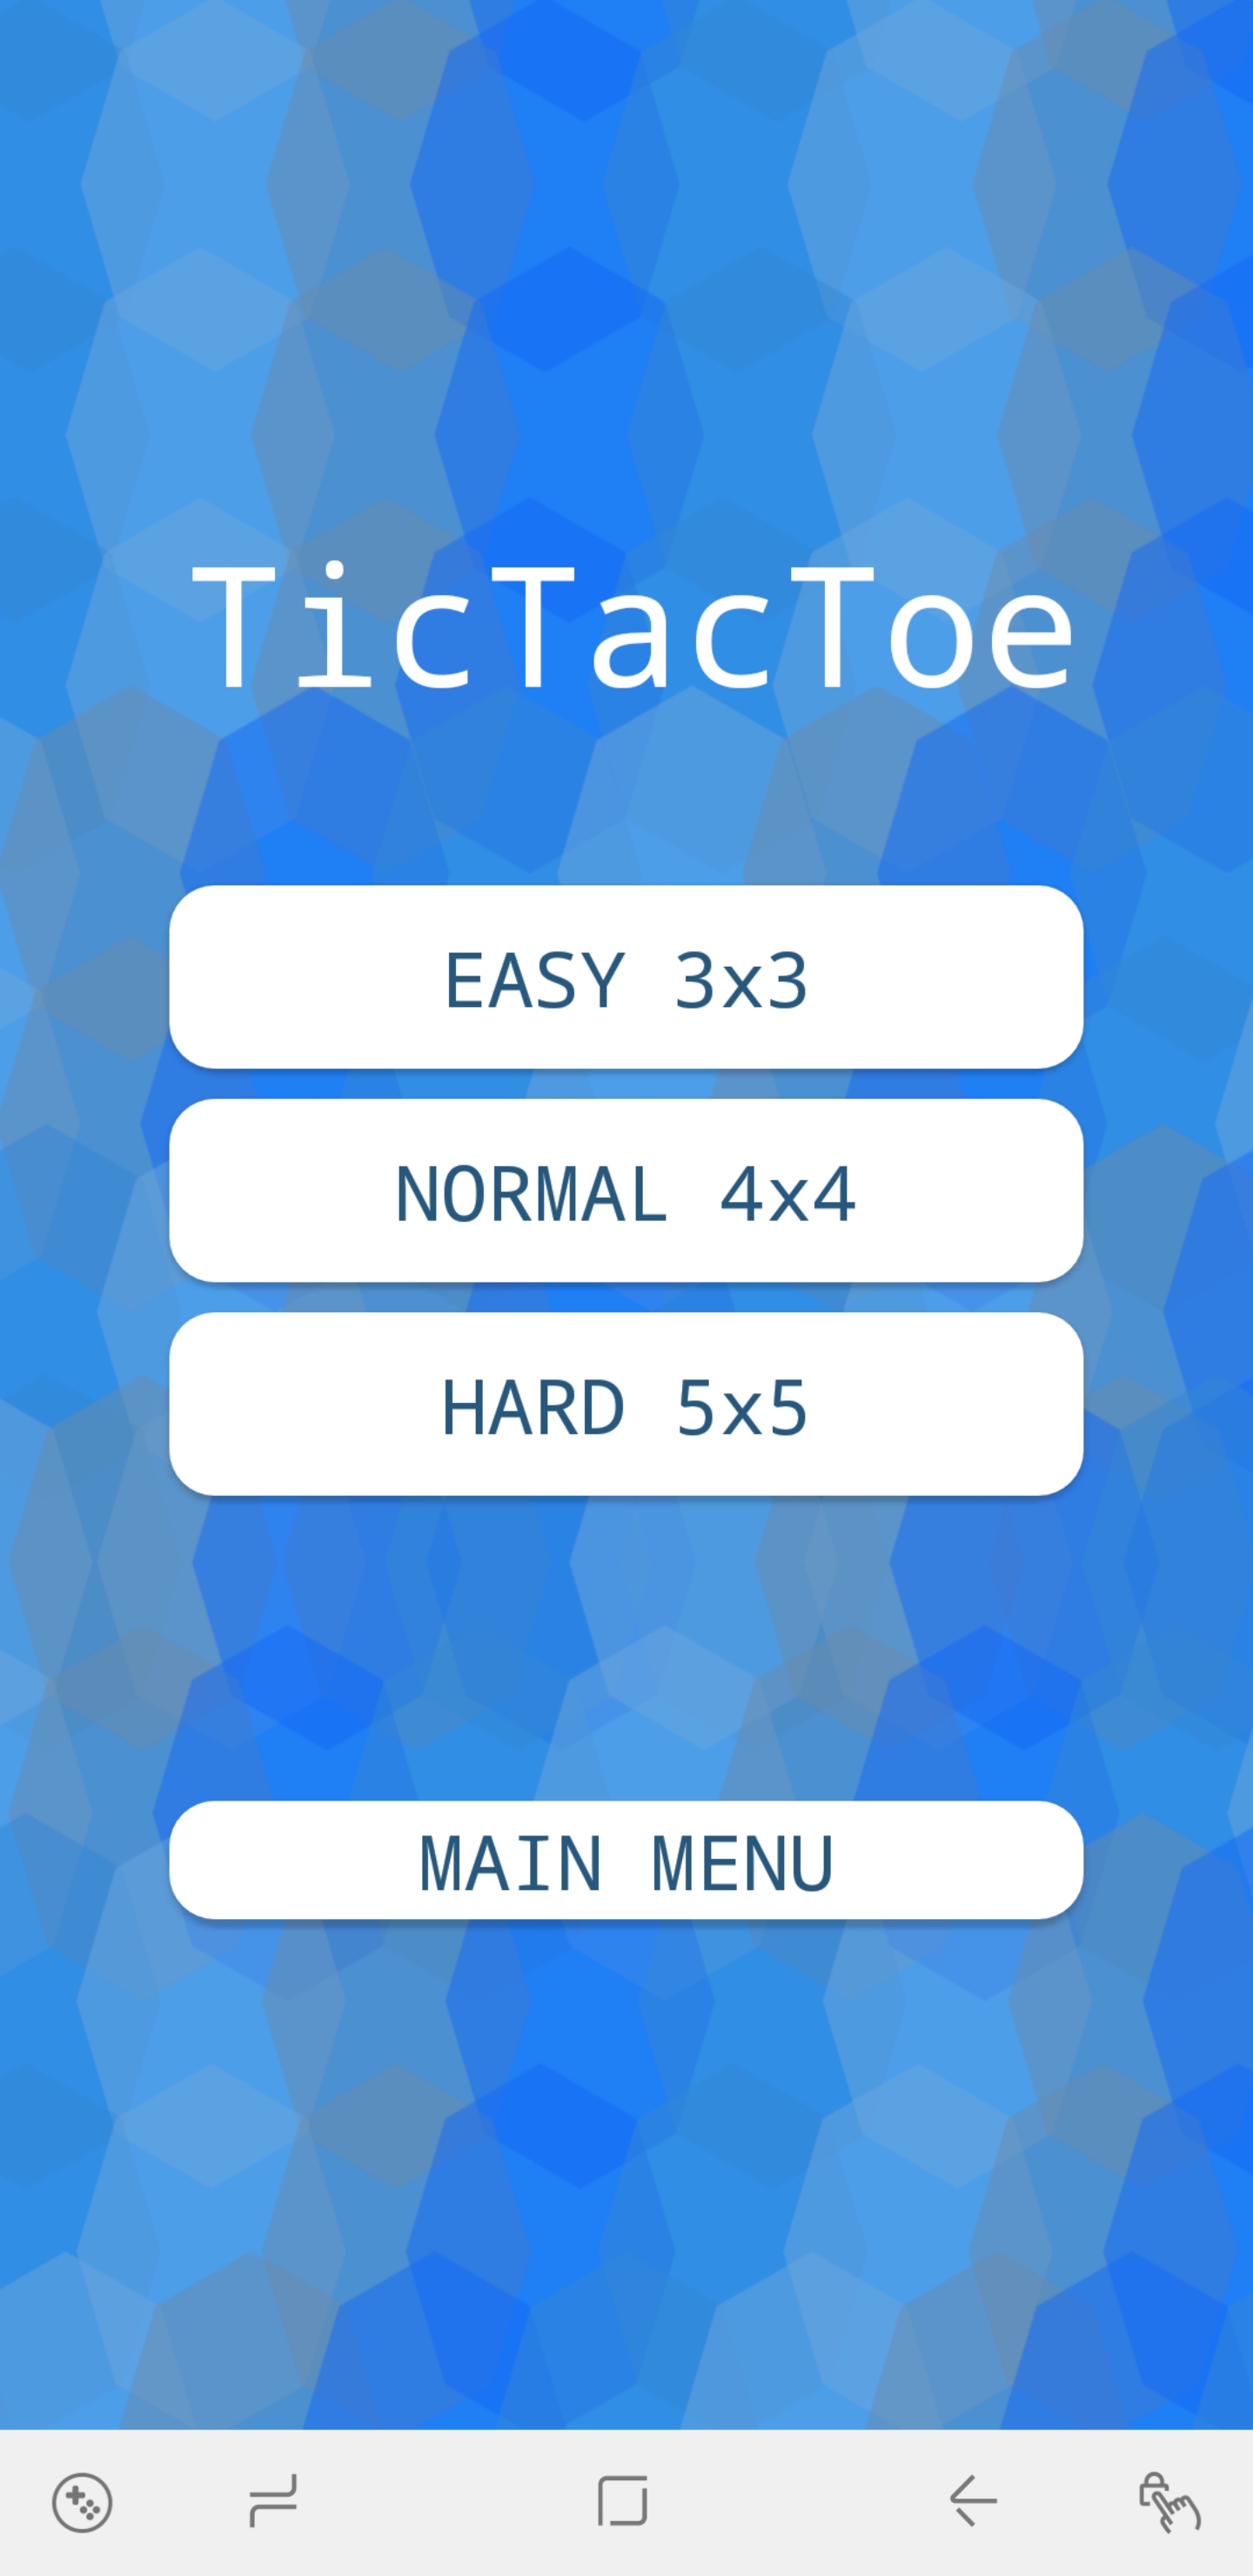 GitHub - zizoh/TicTacToe: Android Tic Tac Toe game implemented in java for  3x3 and 5x5 Boards. Play against computer (Easy, Medium, Impossible Mode)  and against a friend.